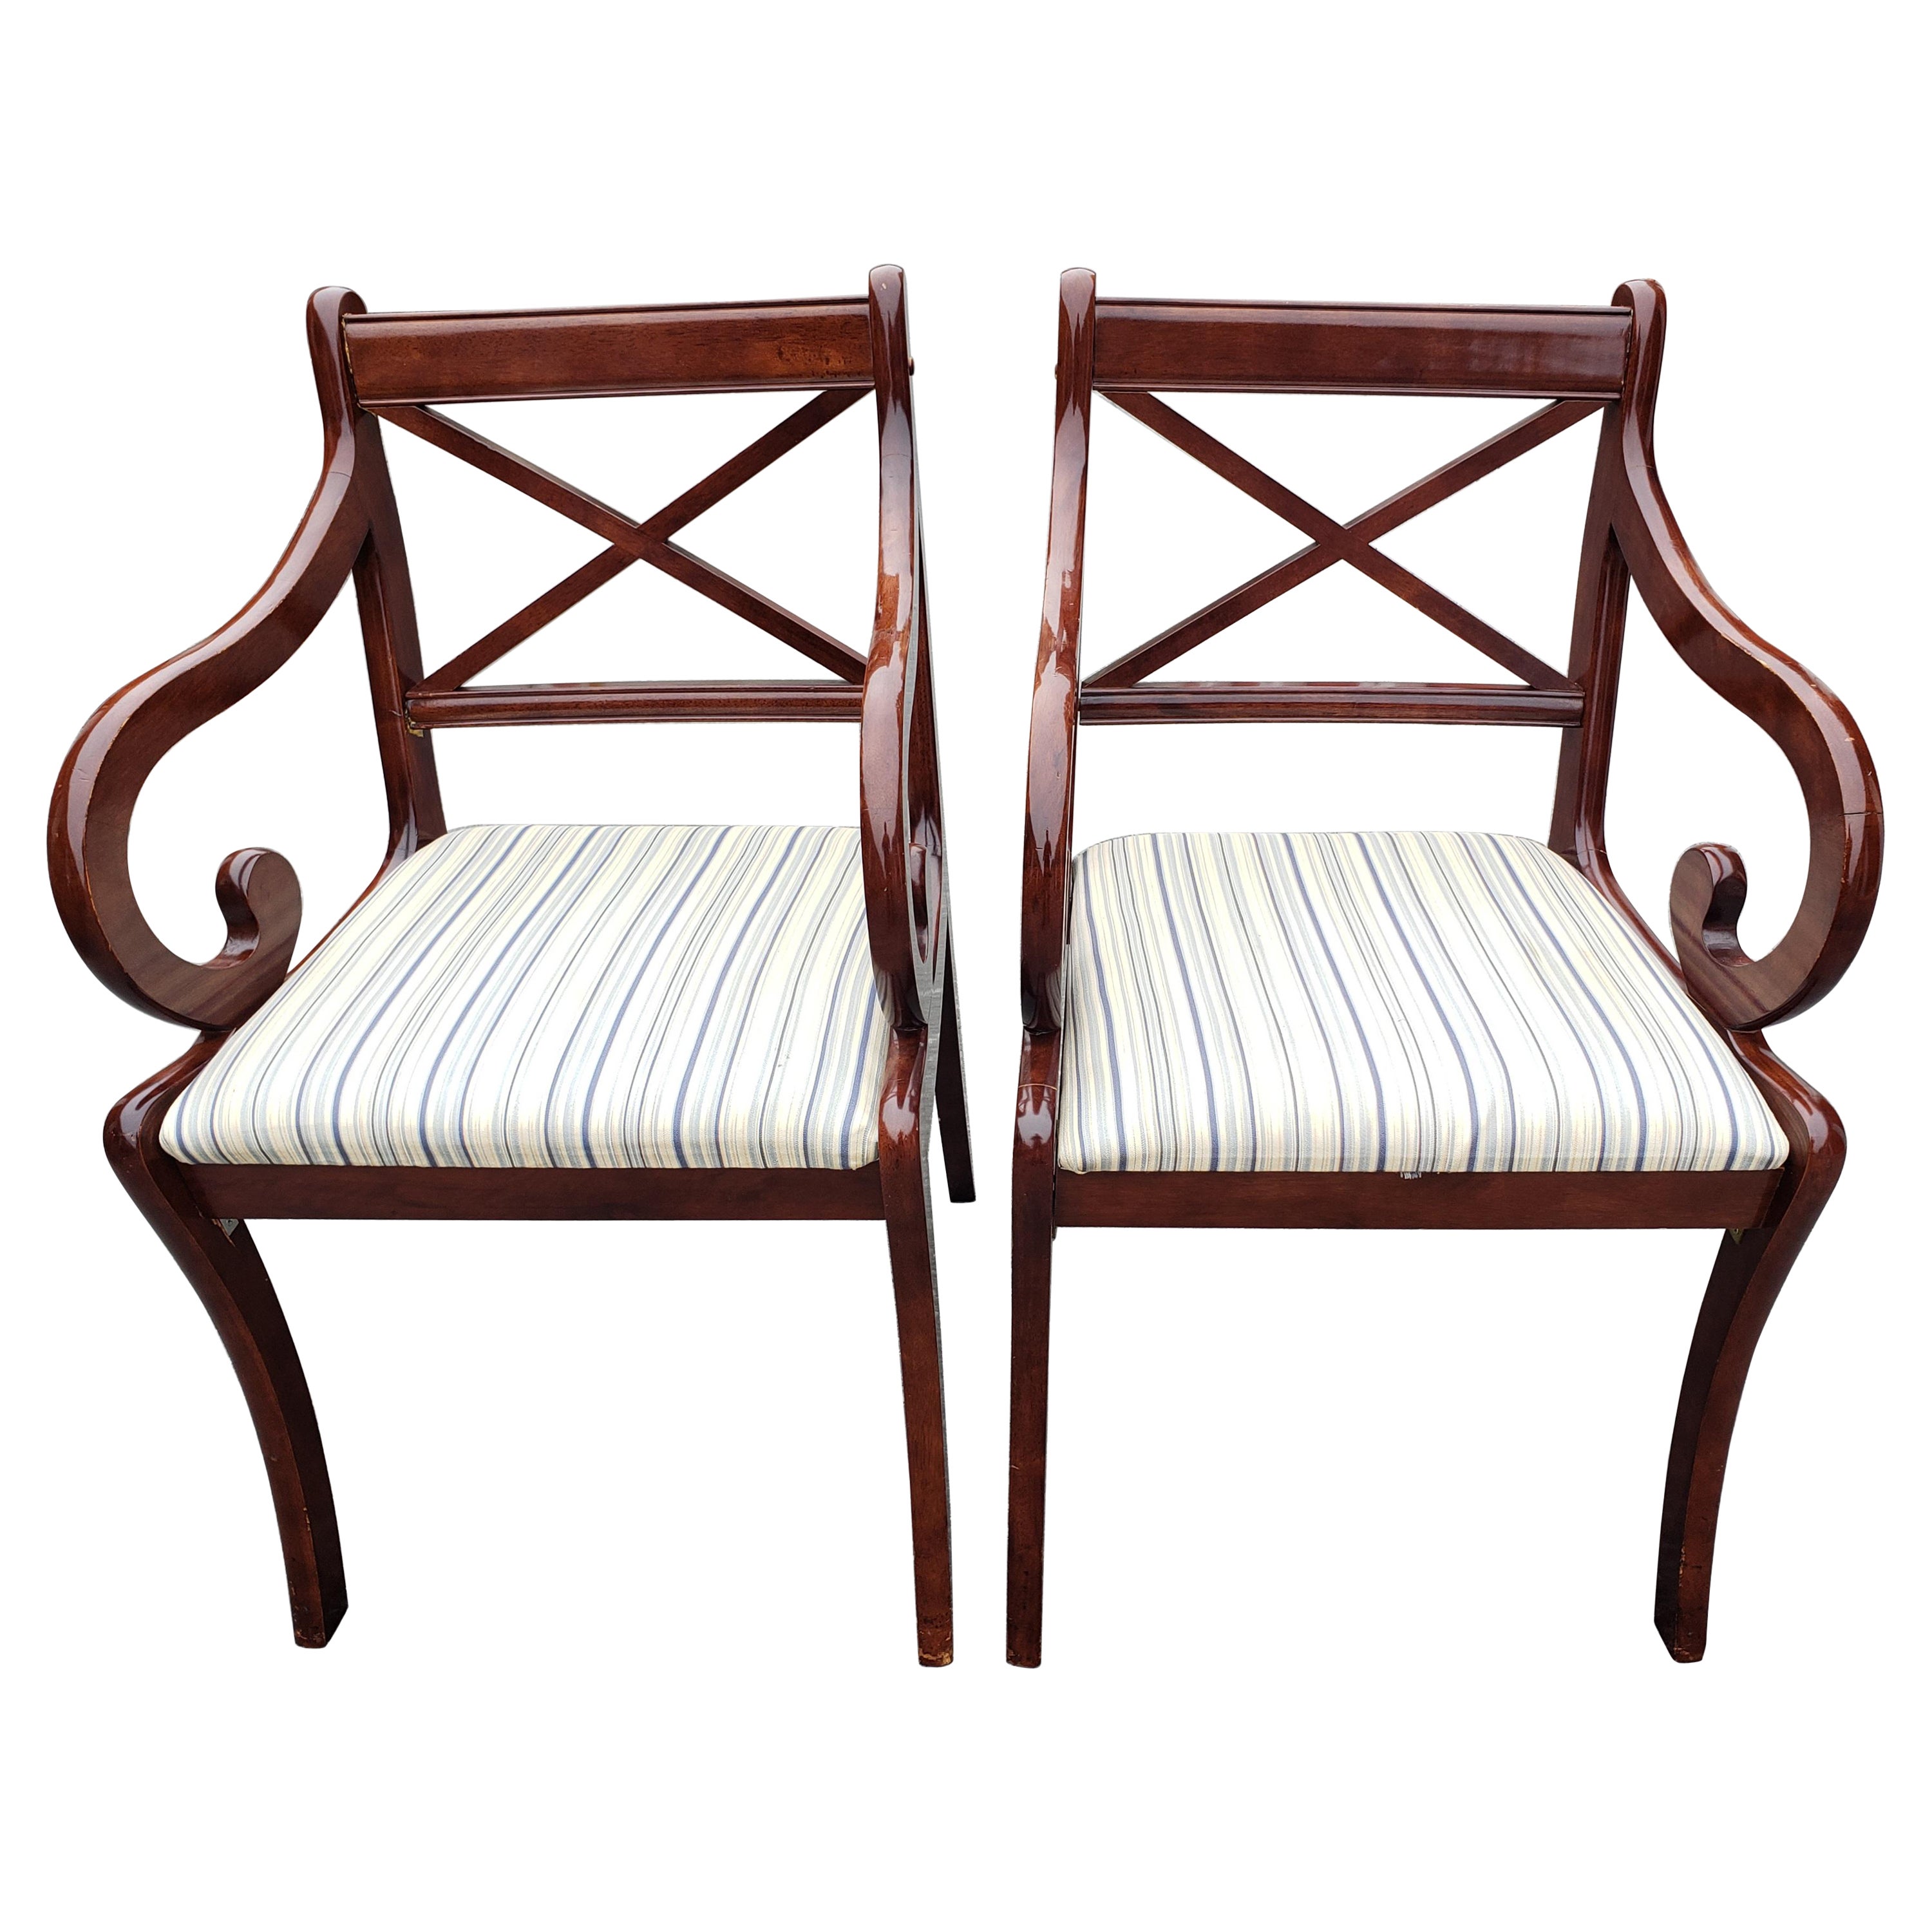 1980s Vintage Regency Mahogany Upholstered Arm Chairs, a Pair For Sale